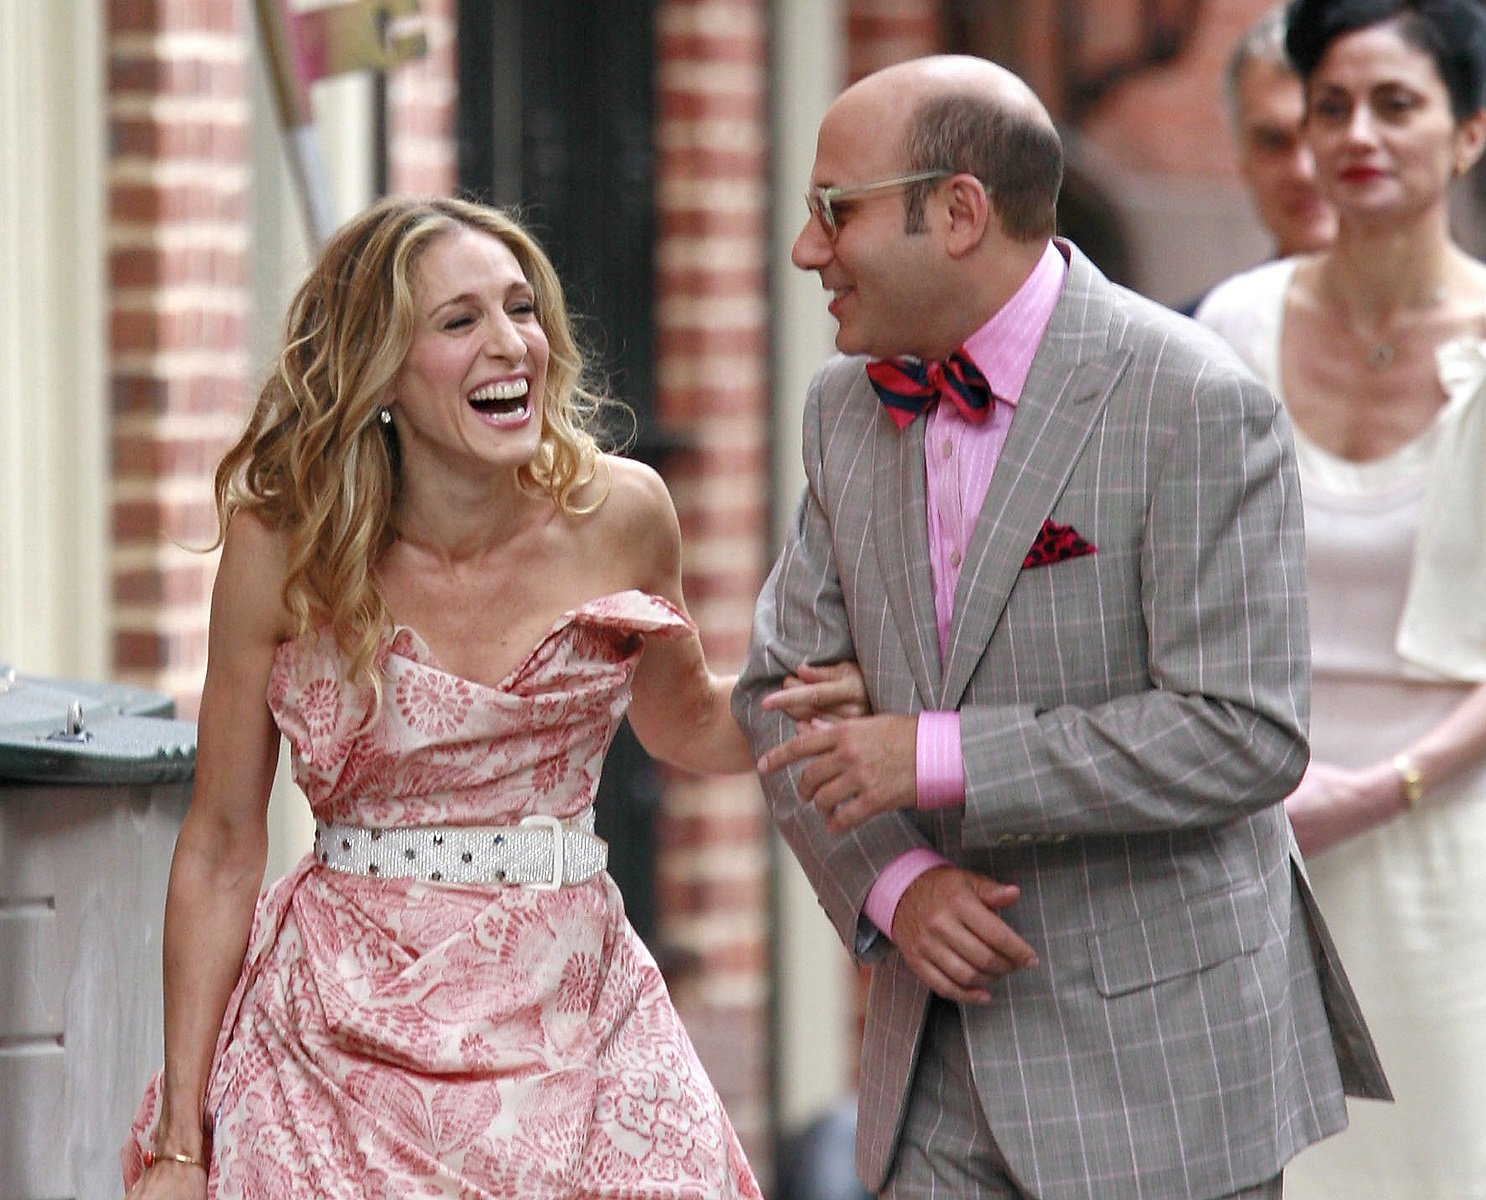 Sarah Jessica Parker and Willie Garson laugh while walking down the street together during the filming of 'Sex and the City' 